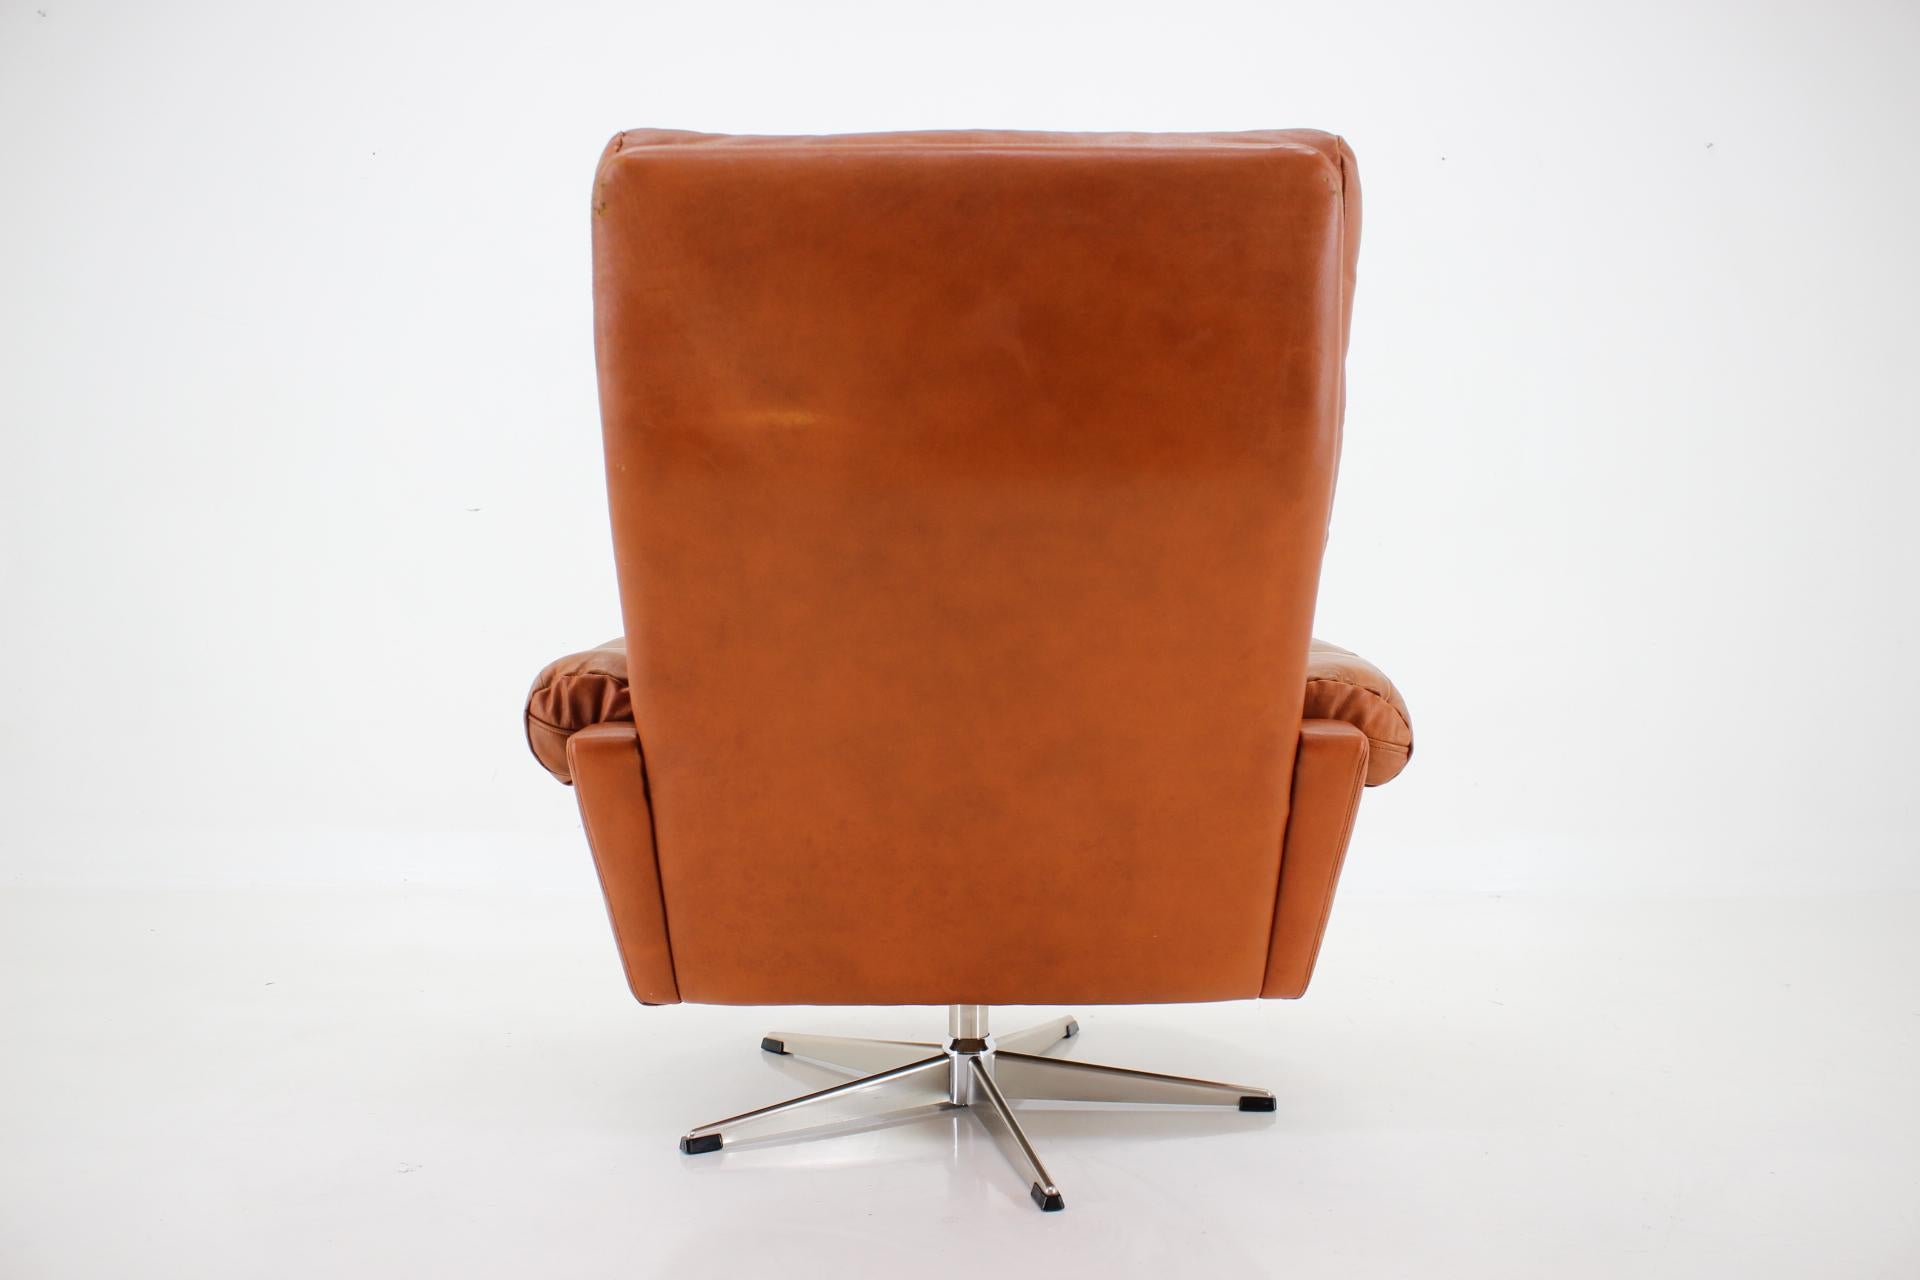 Metal 1970s Leather Swivel Armchair by Nili Stoppmobler, Denmark For Sale